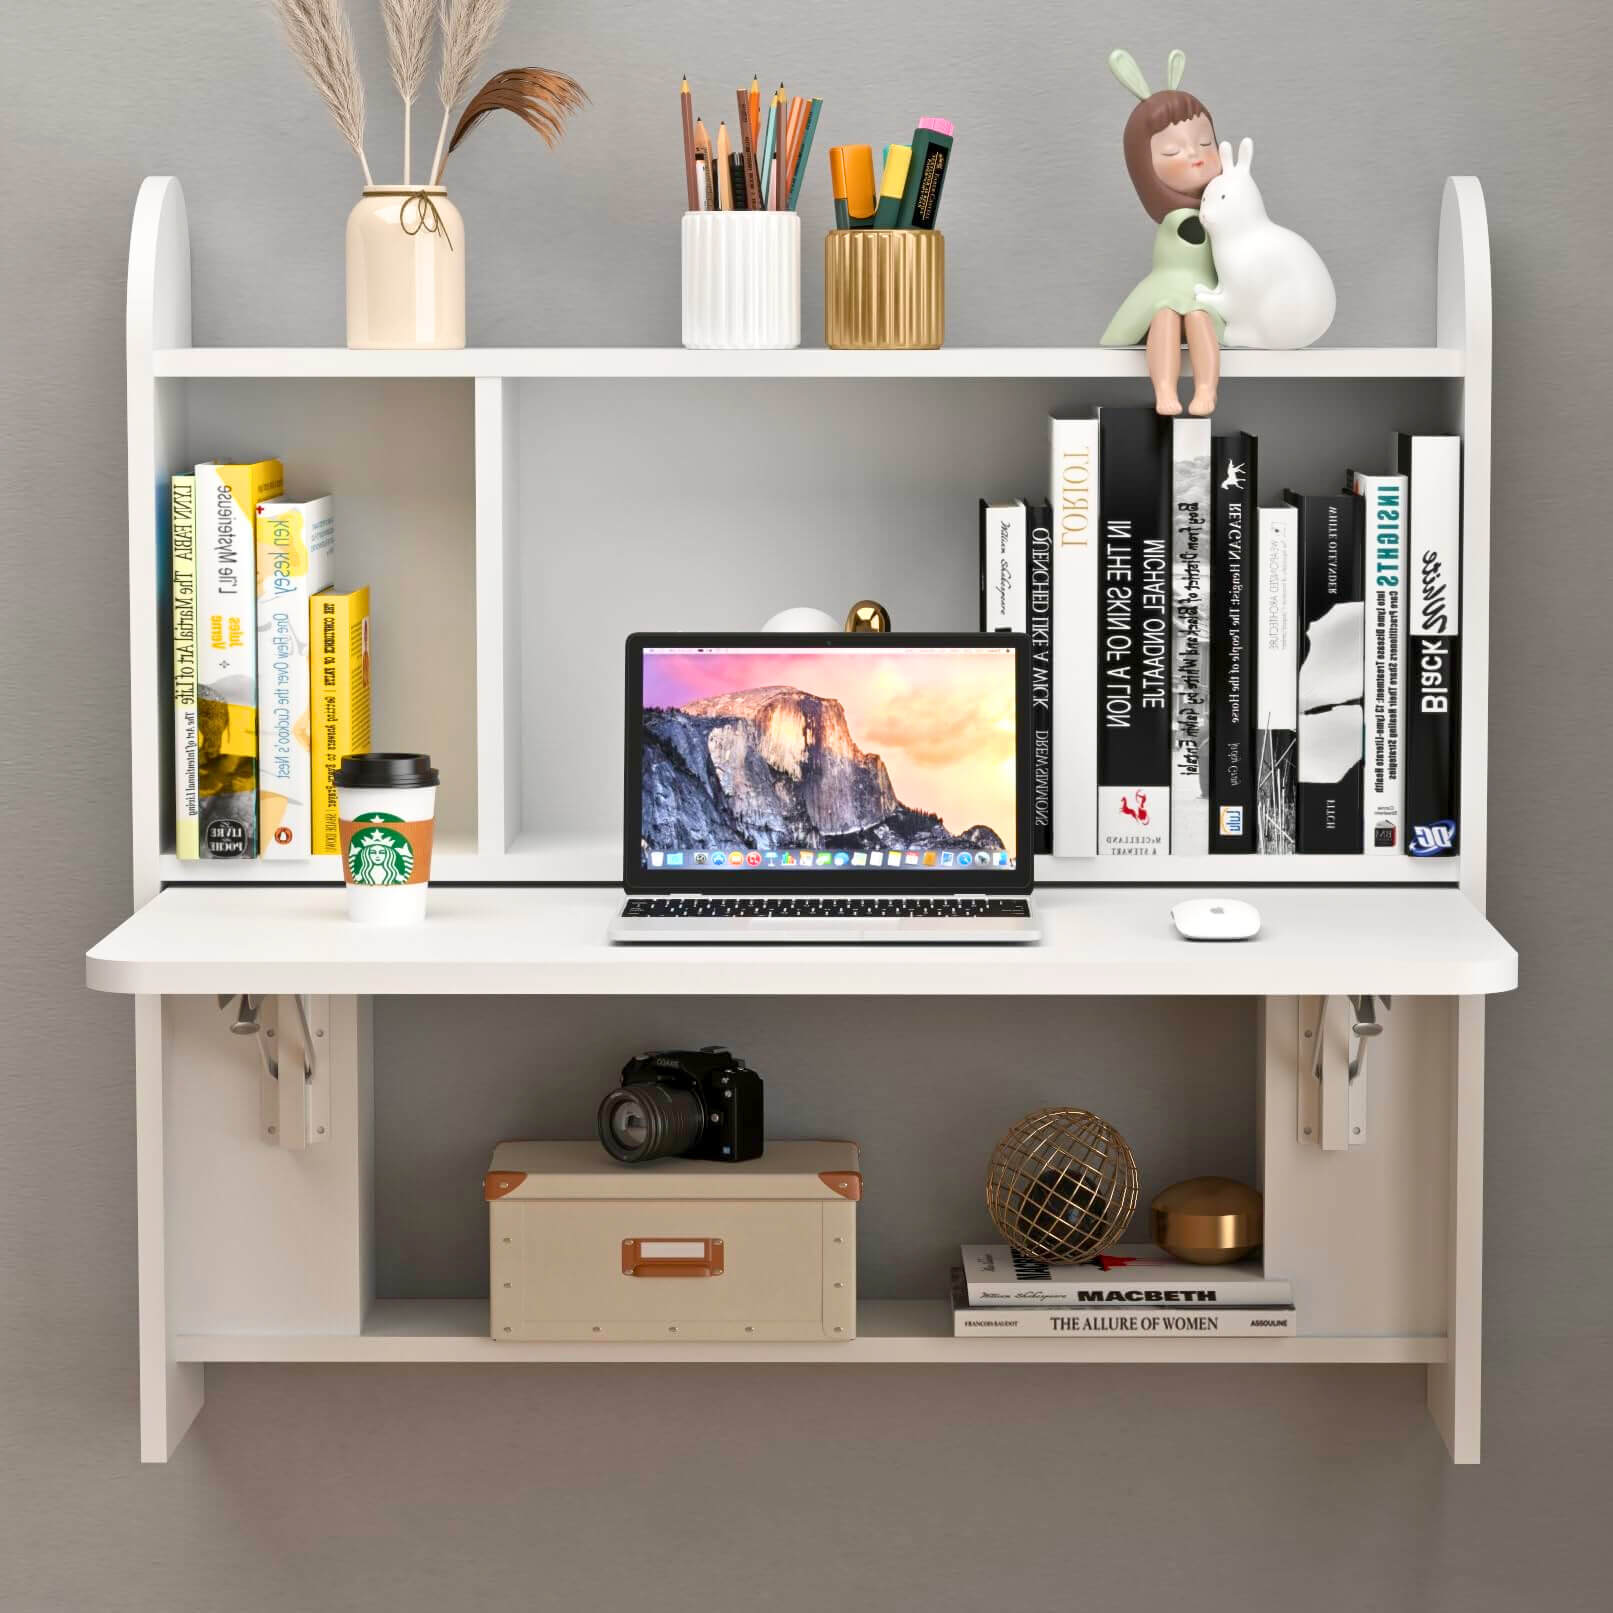 White Wall Mounted Fold Down Desk for Small Space with Storage Shelf